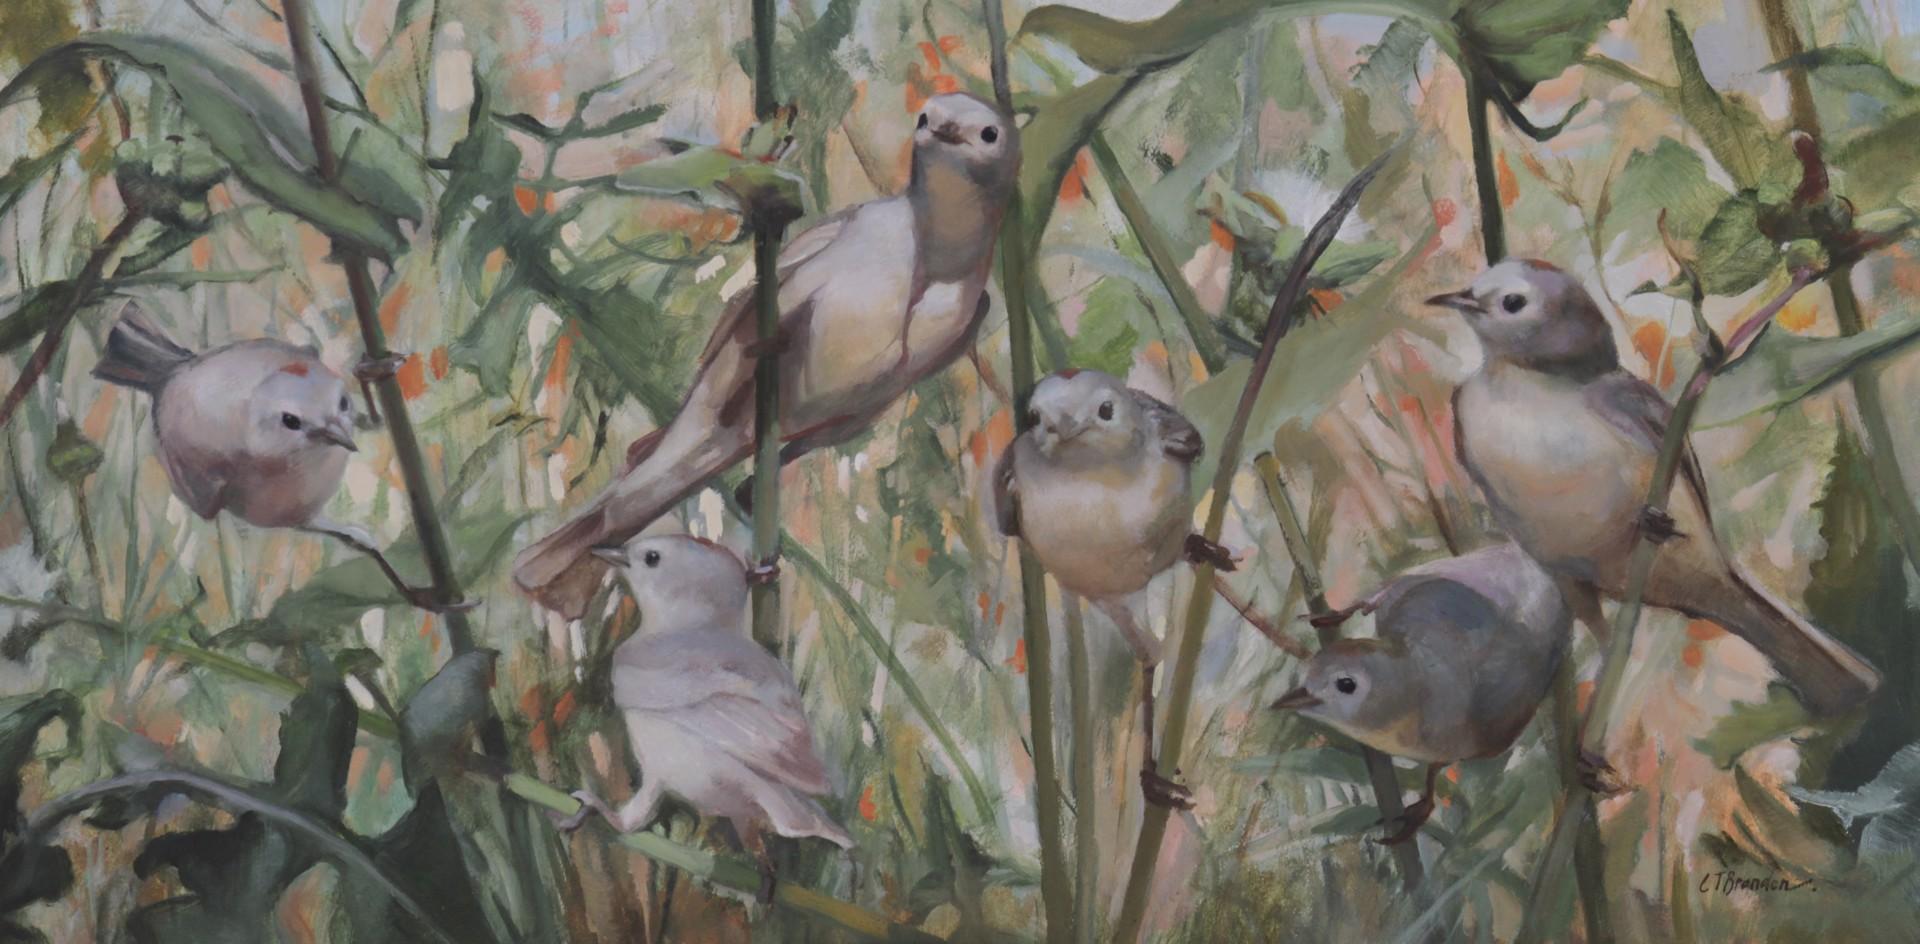 Linda Tracey Brandon Figurative Painting - Lucy's Warblers in the Weeds